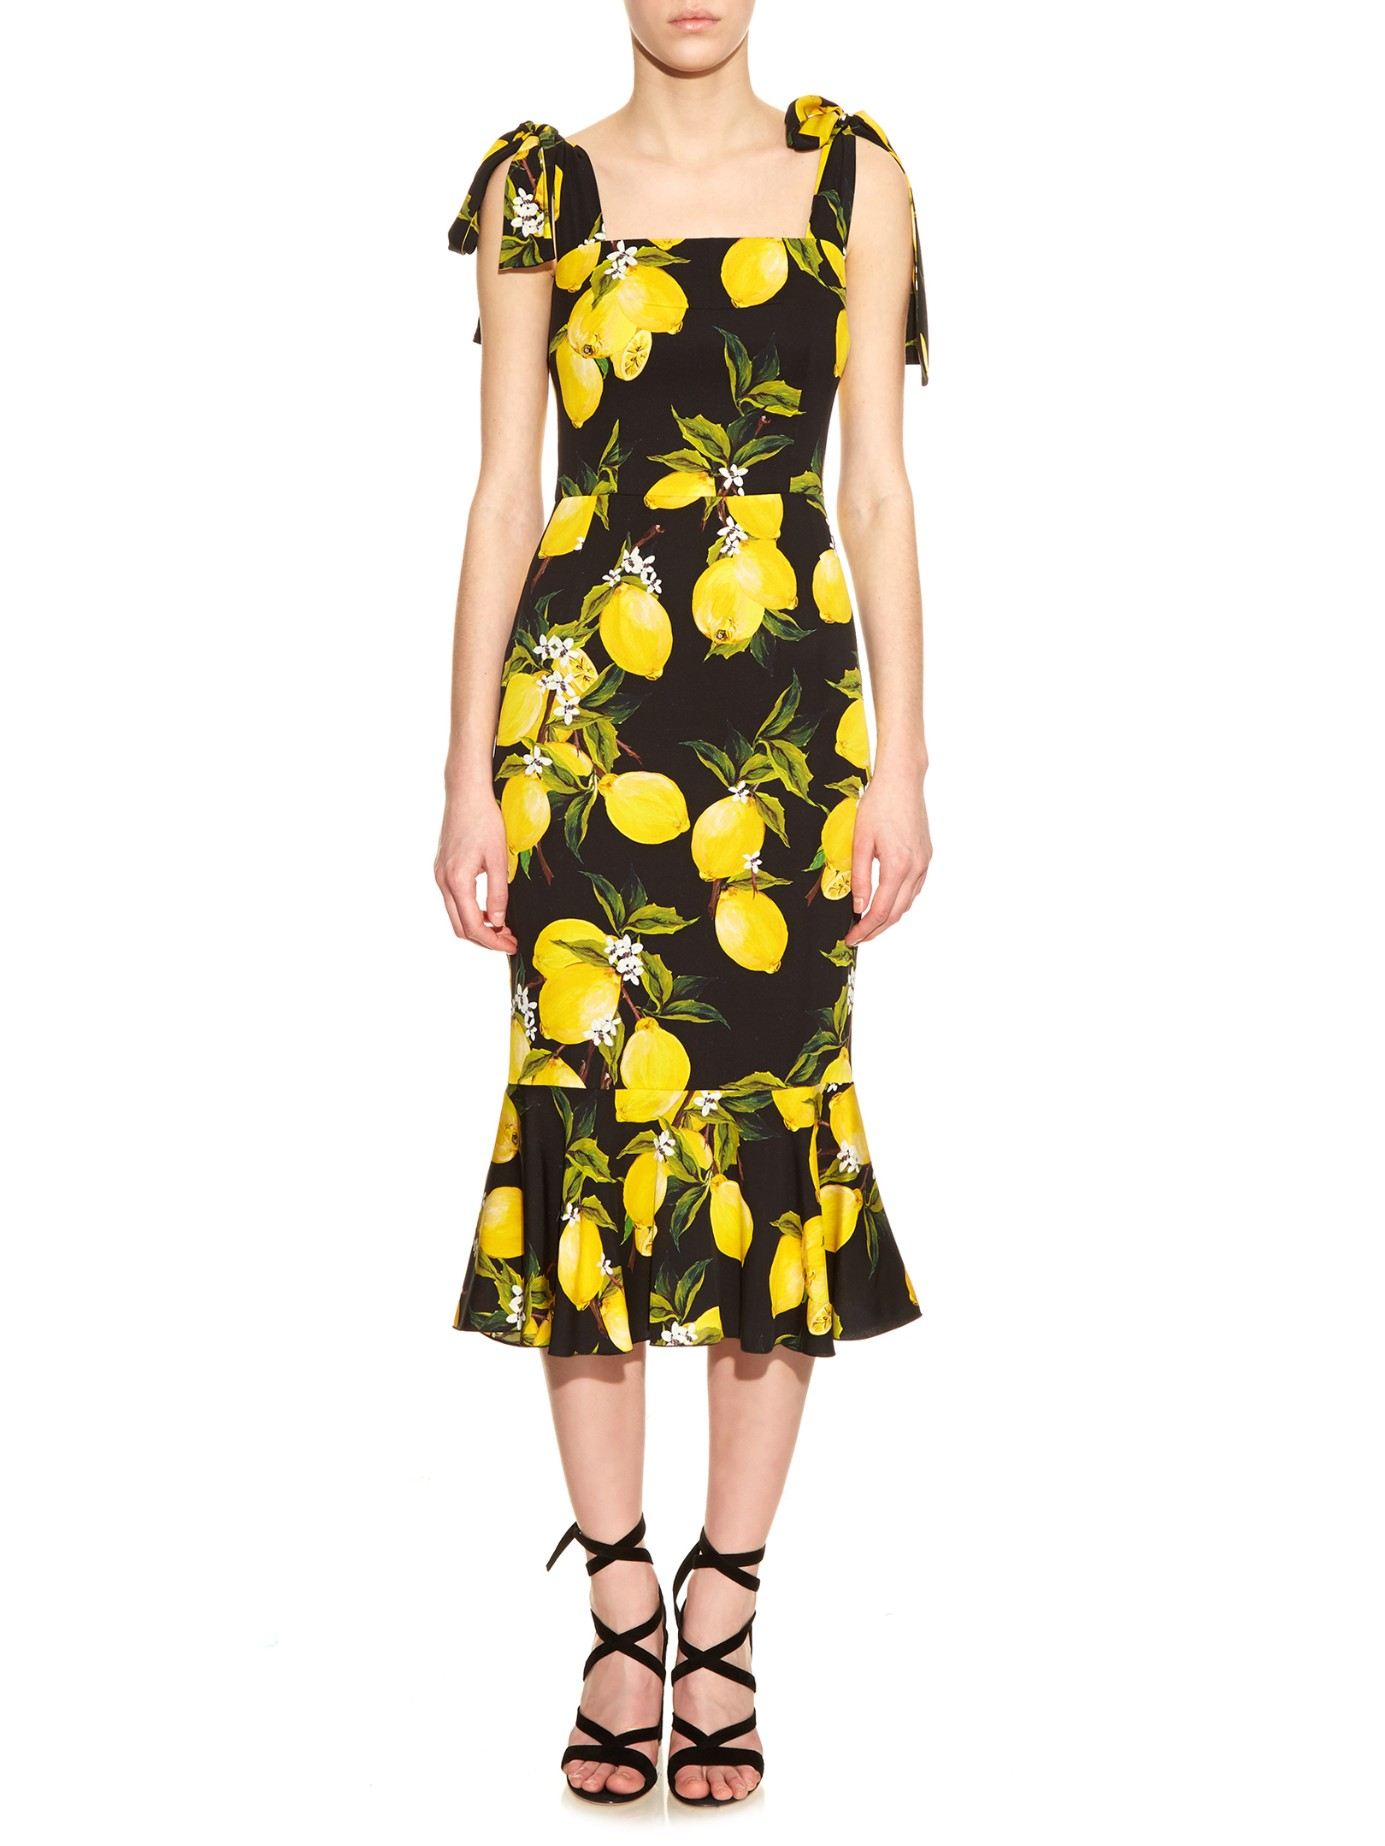 Styling a Lemon Print Dress for Cooler Weather